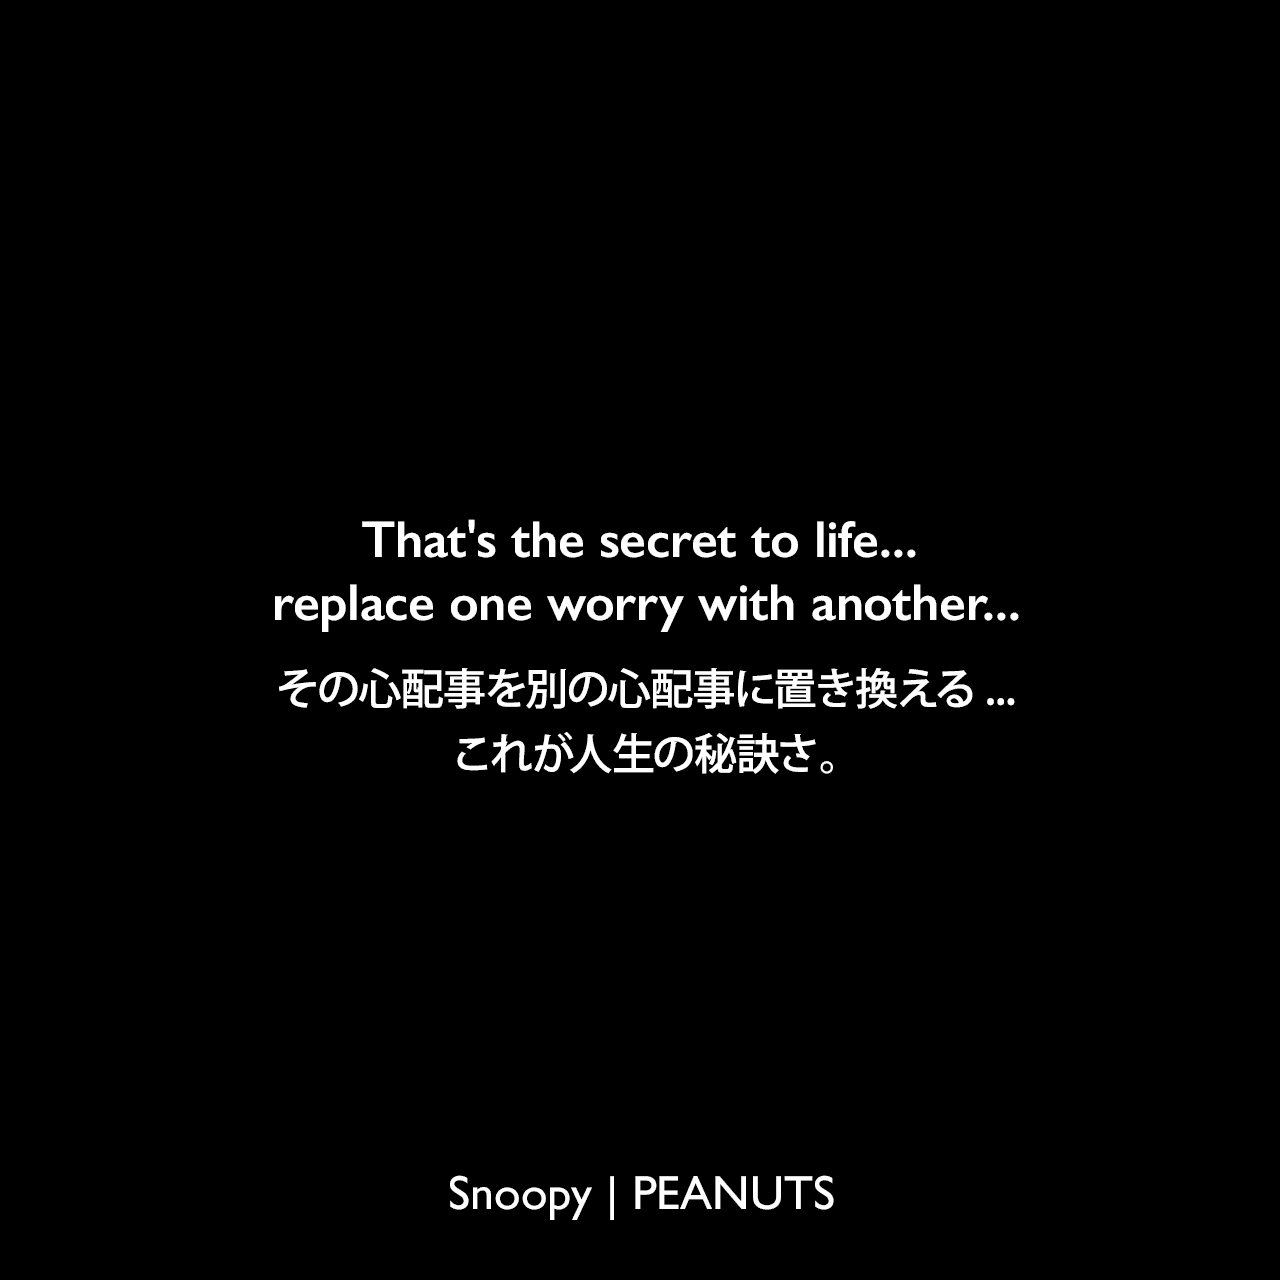 That's the secret to life... replace one worry with another...その心配事を別の心配事に置き換える...これが人生の秘訣さ。- チャーリー・ブラウン (1981年9月2日のコミック)Charles Monroe Schulz